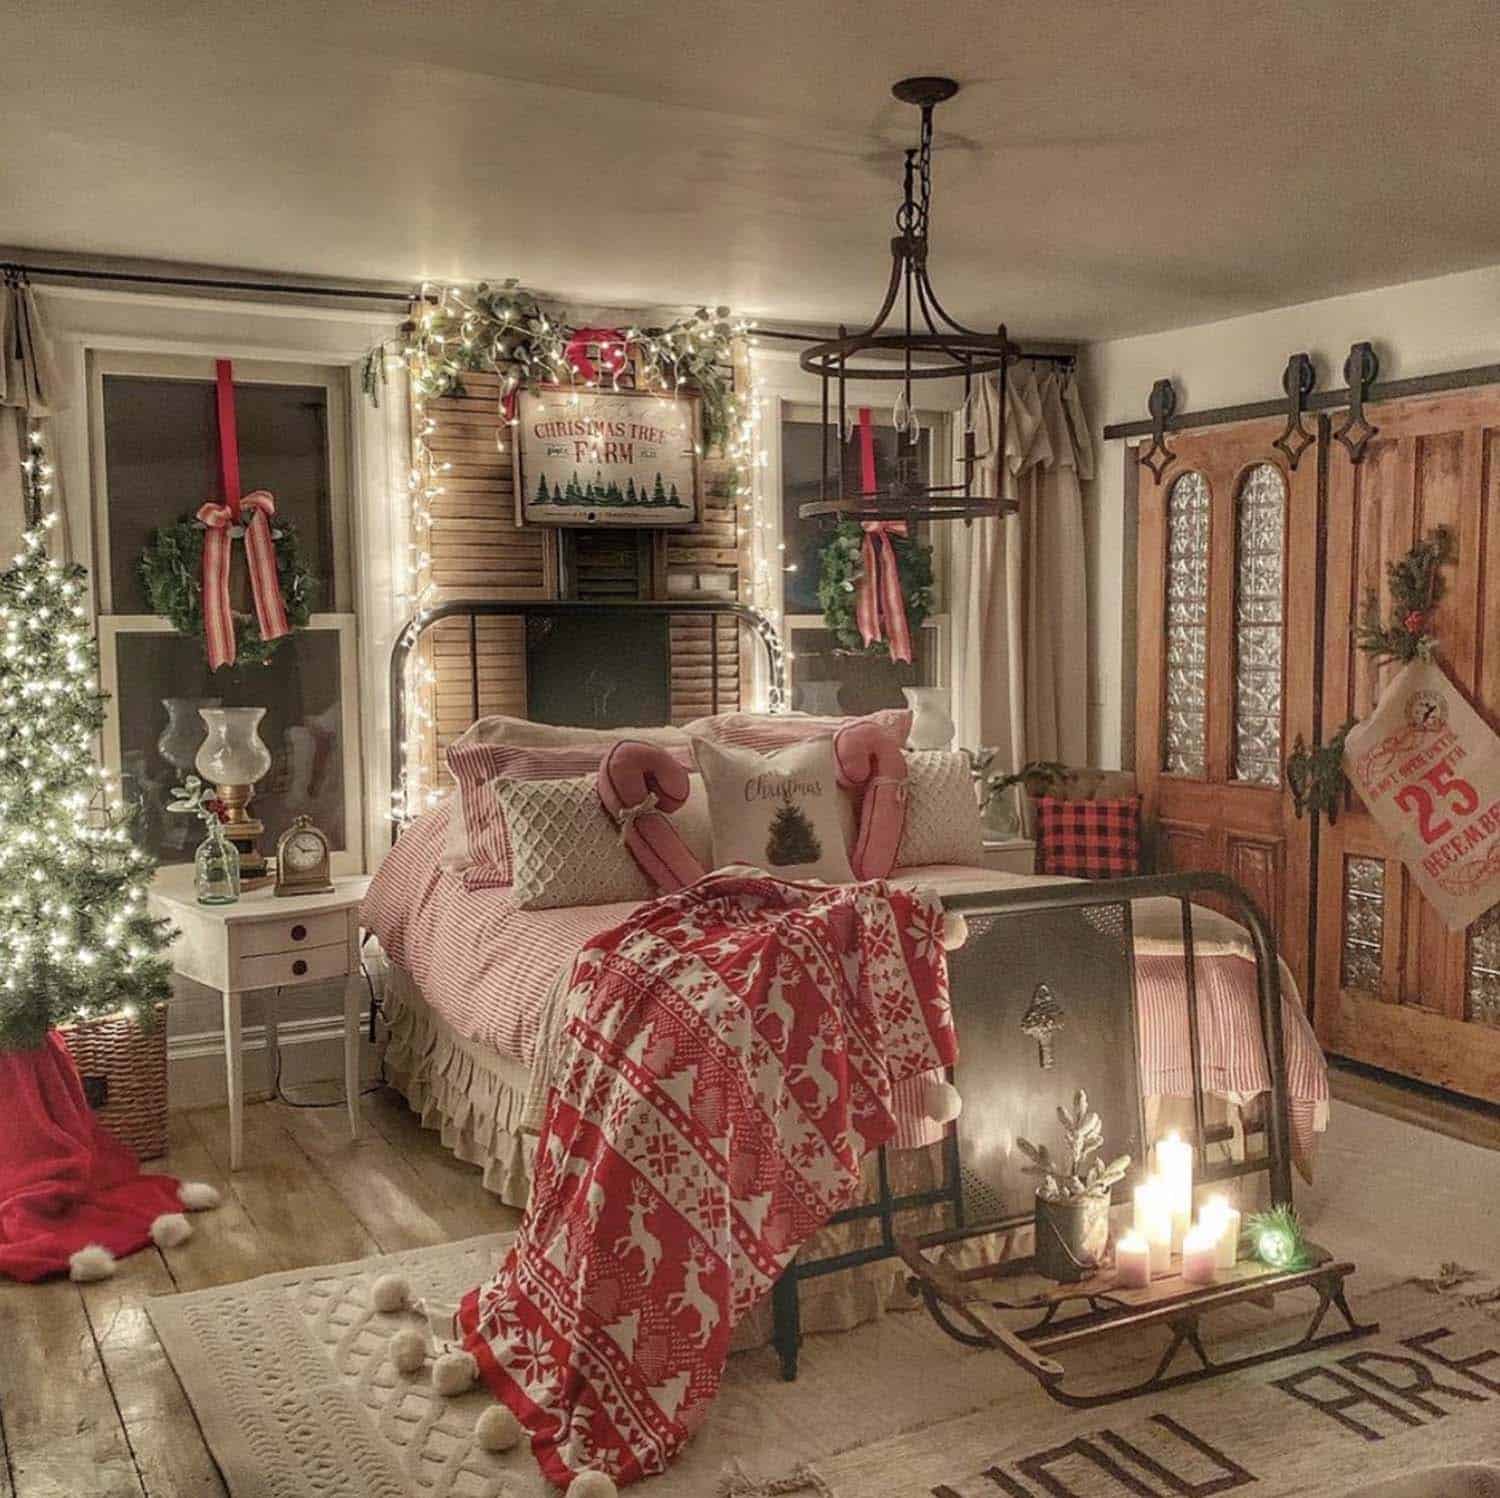 christmas decorated bedroom with red and white decorations and lighted trees